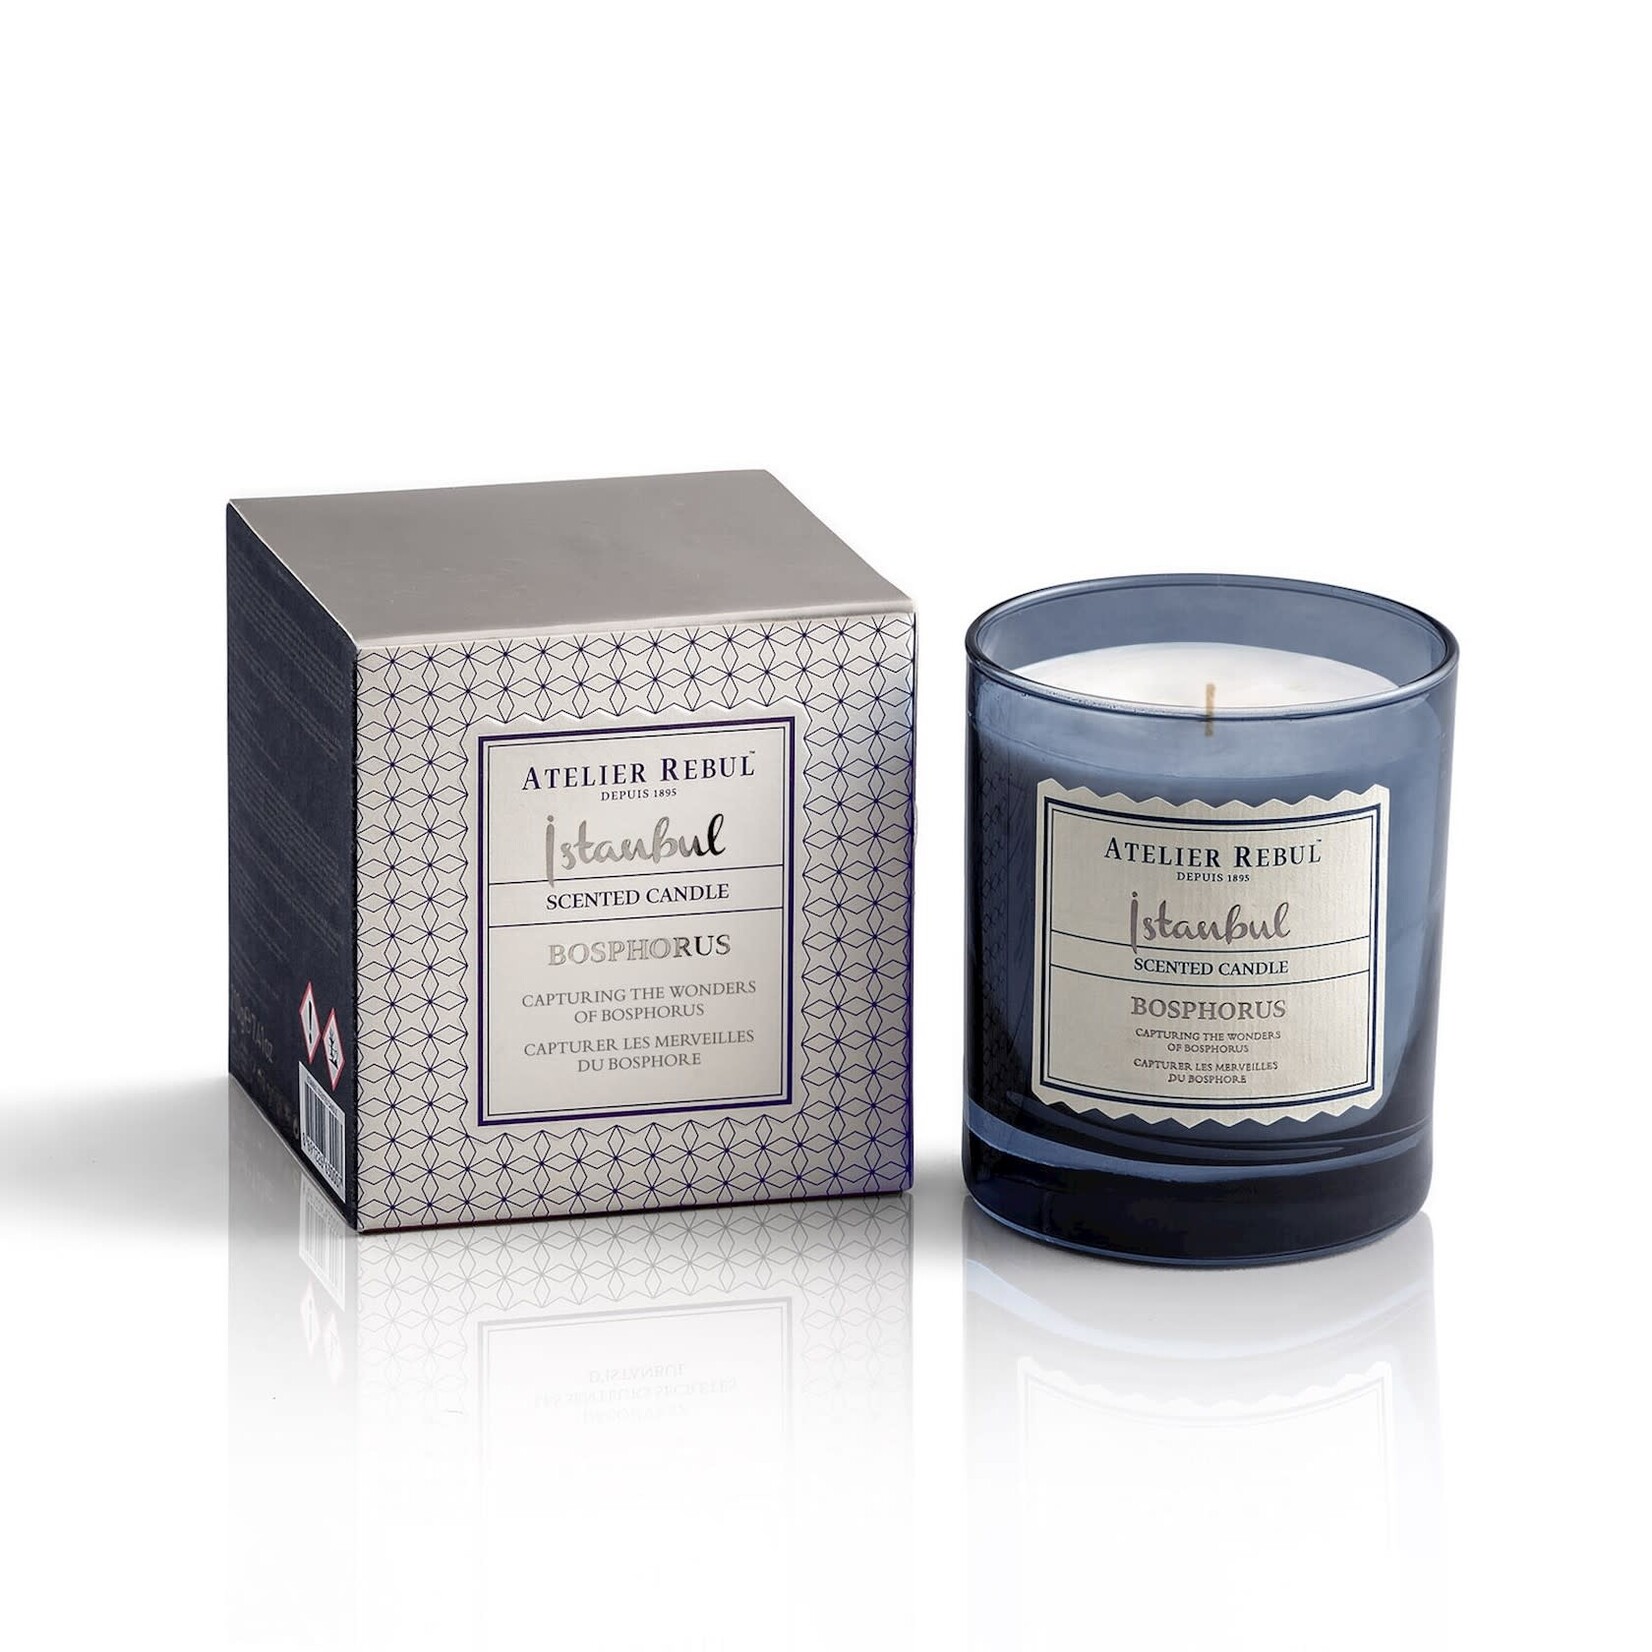 Atelier Rebul Istanbul Bosphorus Scented Candle 210 gr